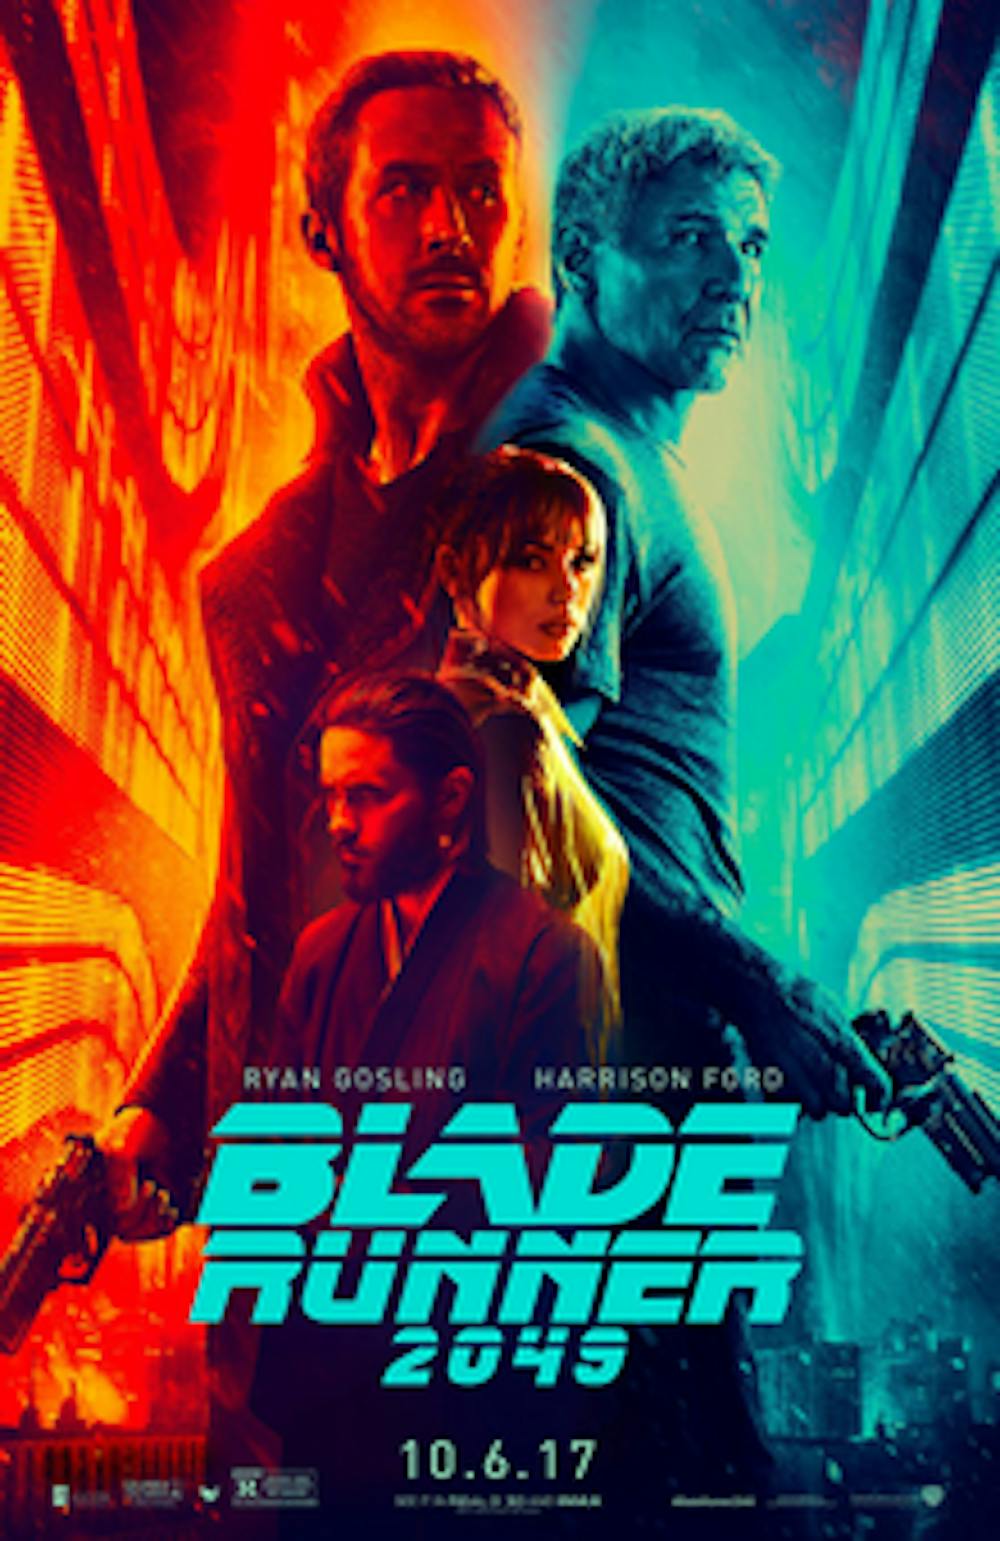 "Blade Runner 2049" is a worthy, shiny sequel, but ultimately lacks the humanity of its predecessor.